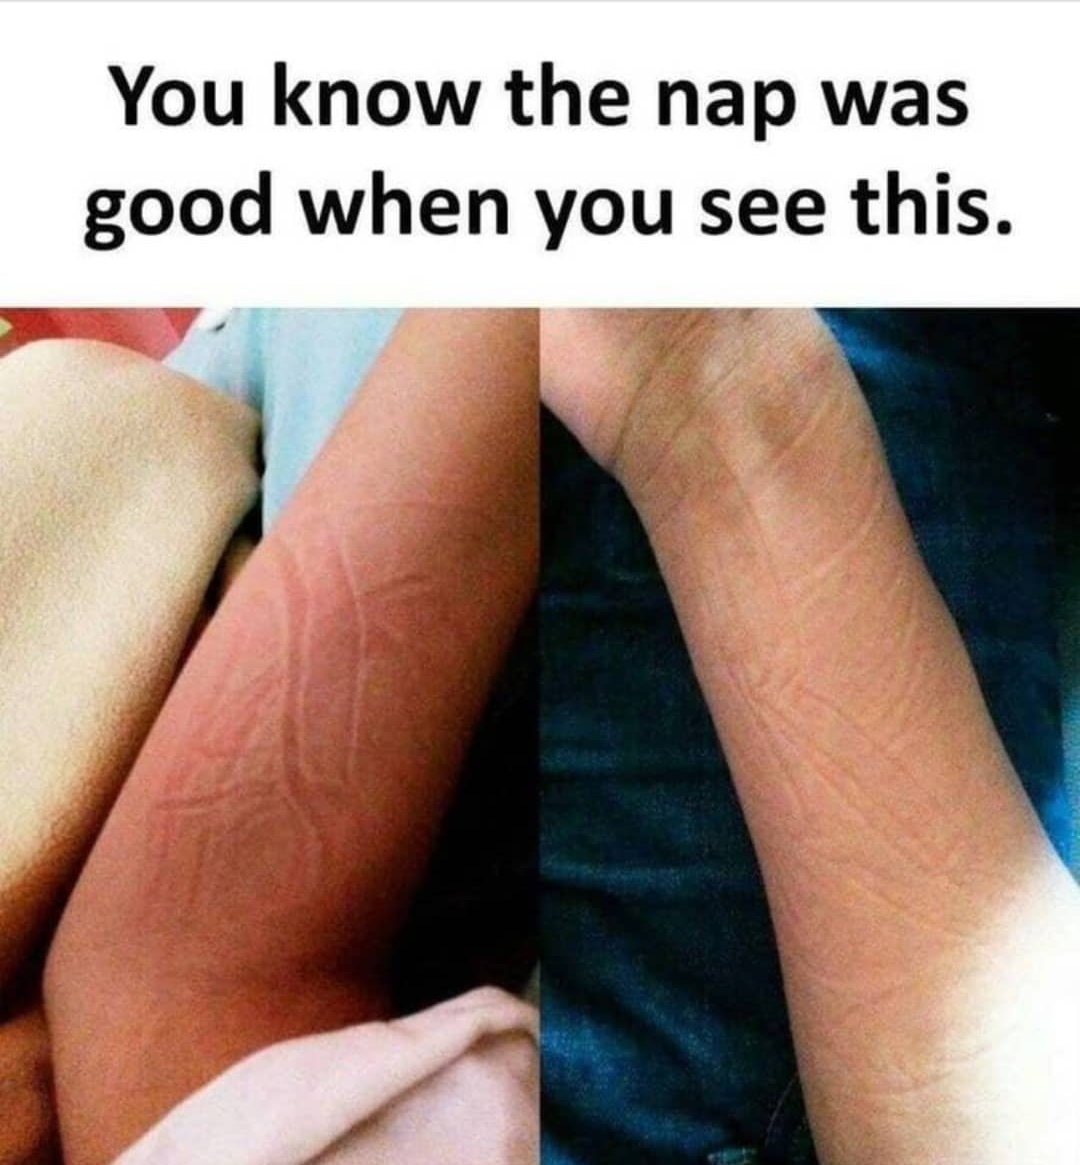 funny memes - my feelings for you - You know the nap was good when you see this.